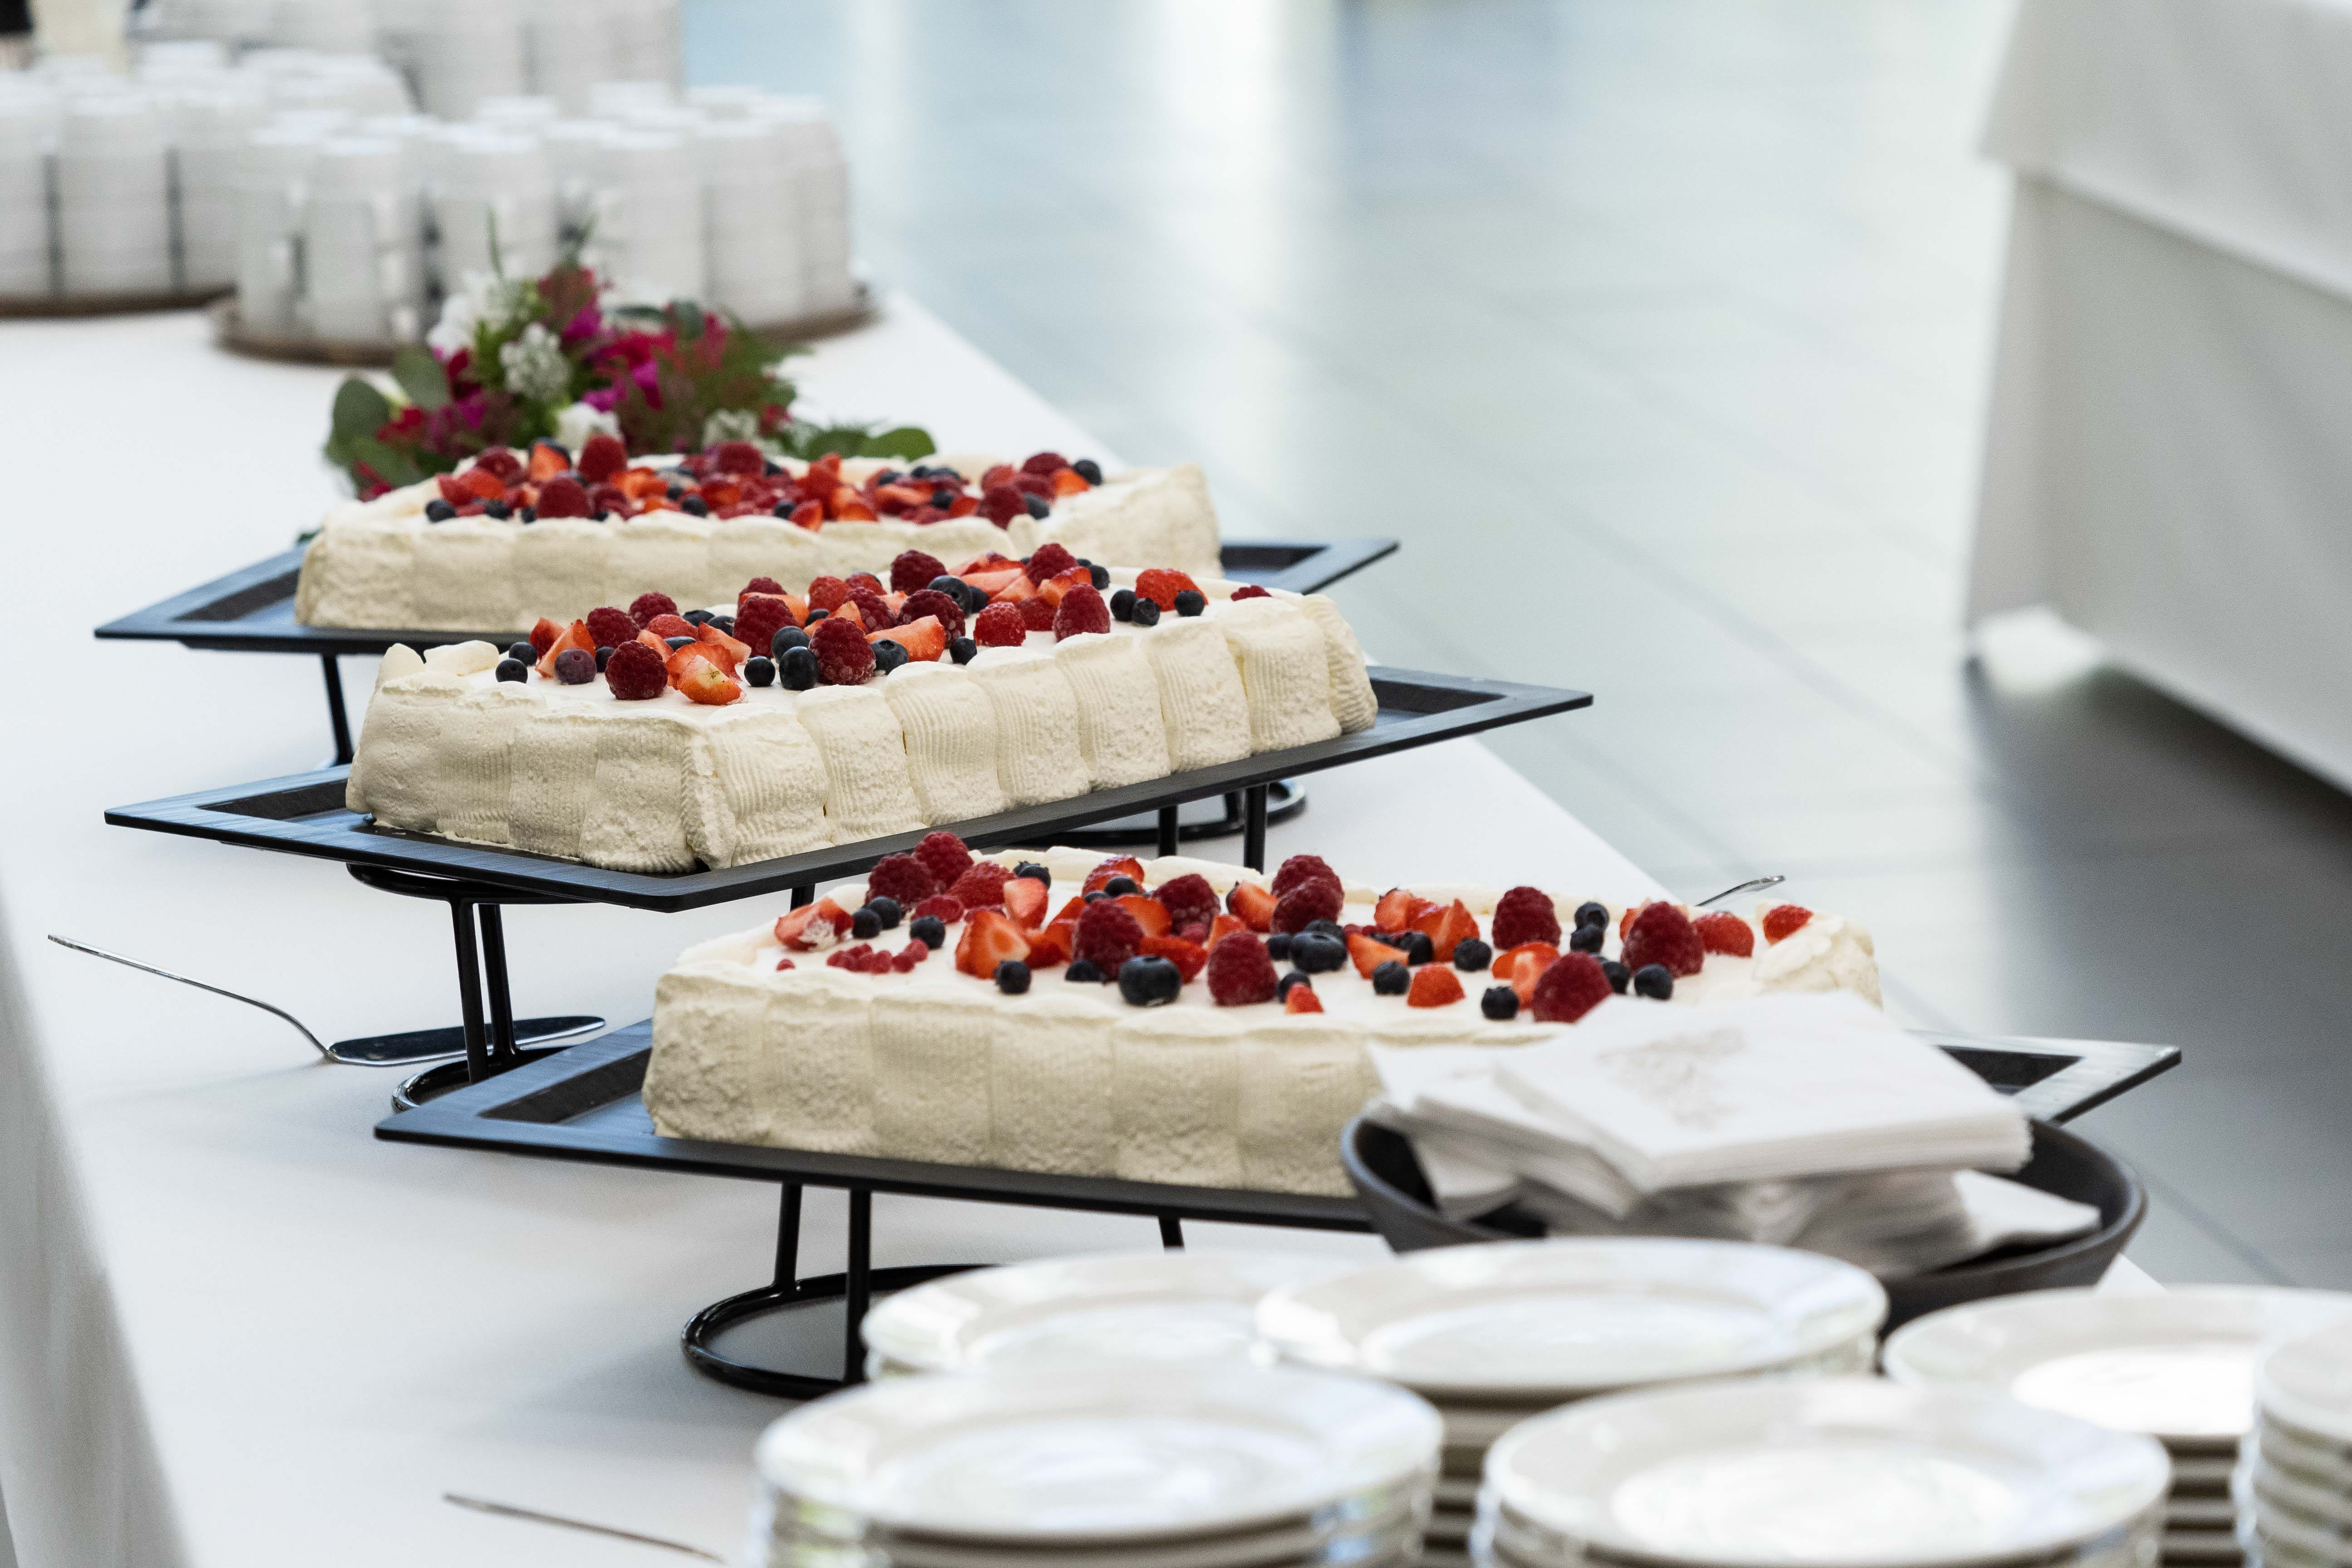 Berry-cream cakes on the serving table.